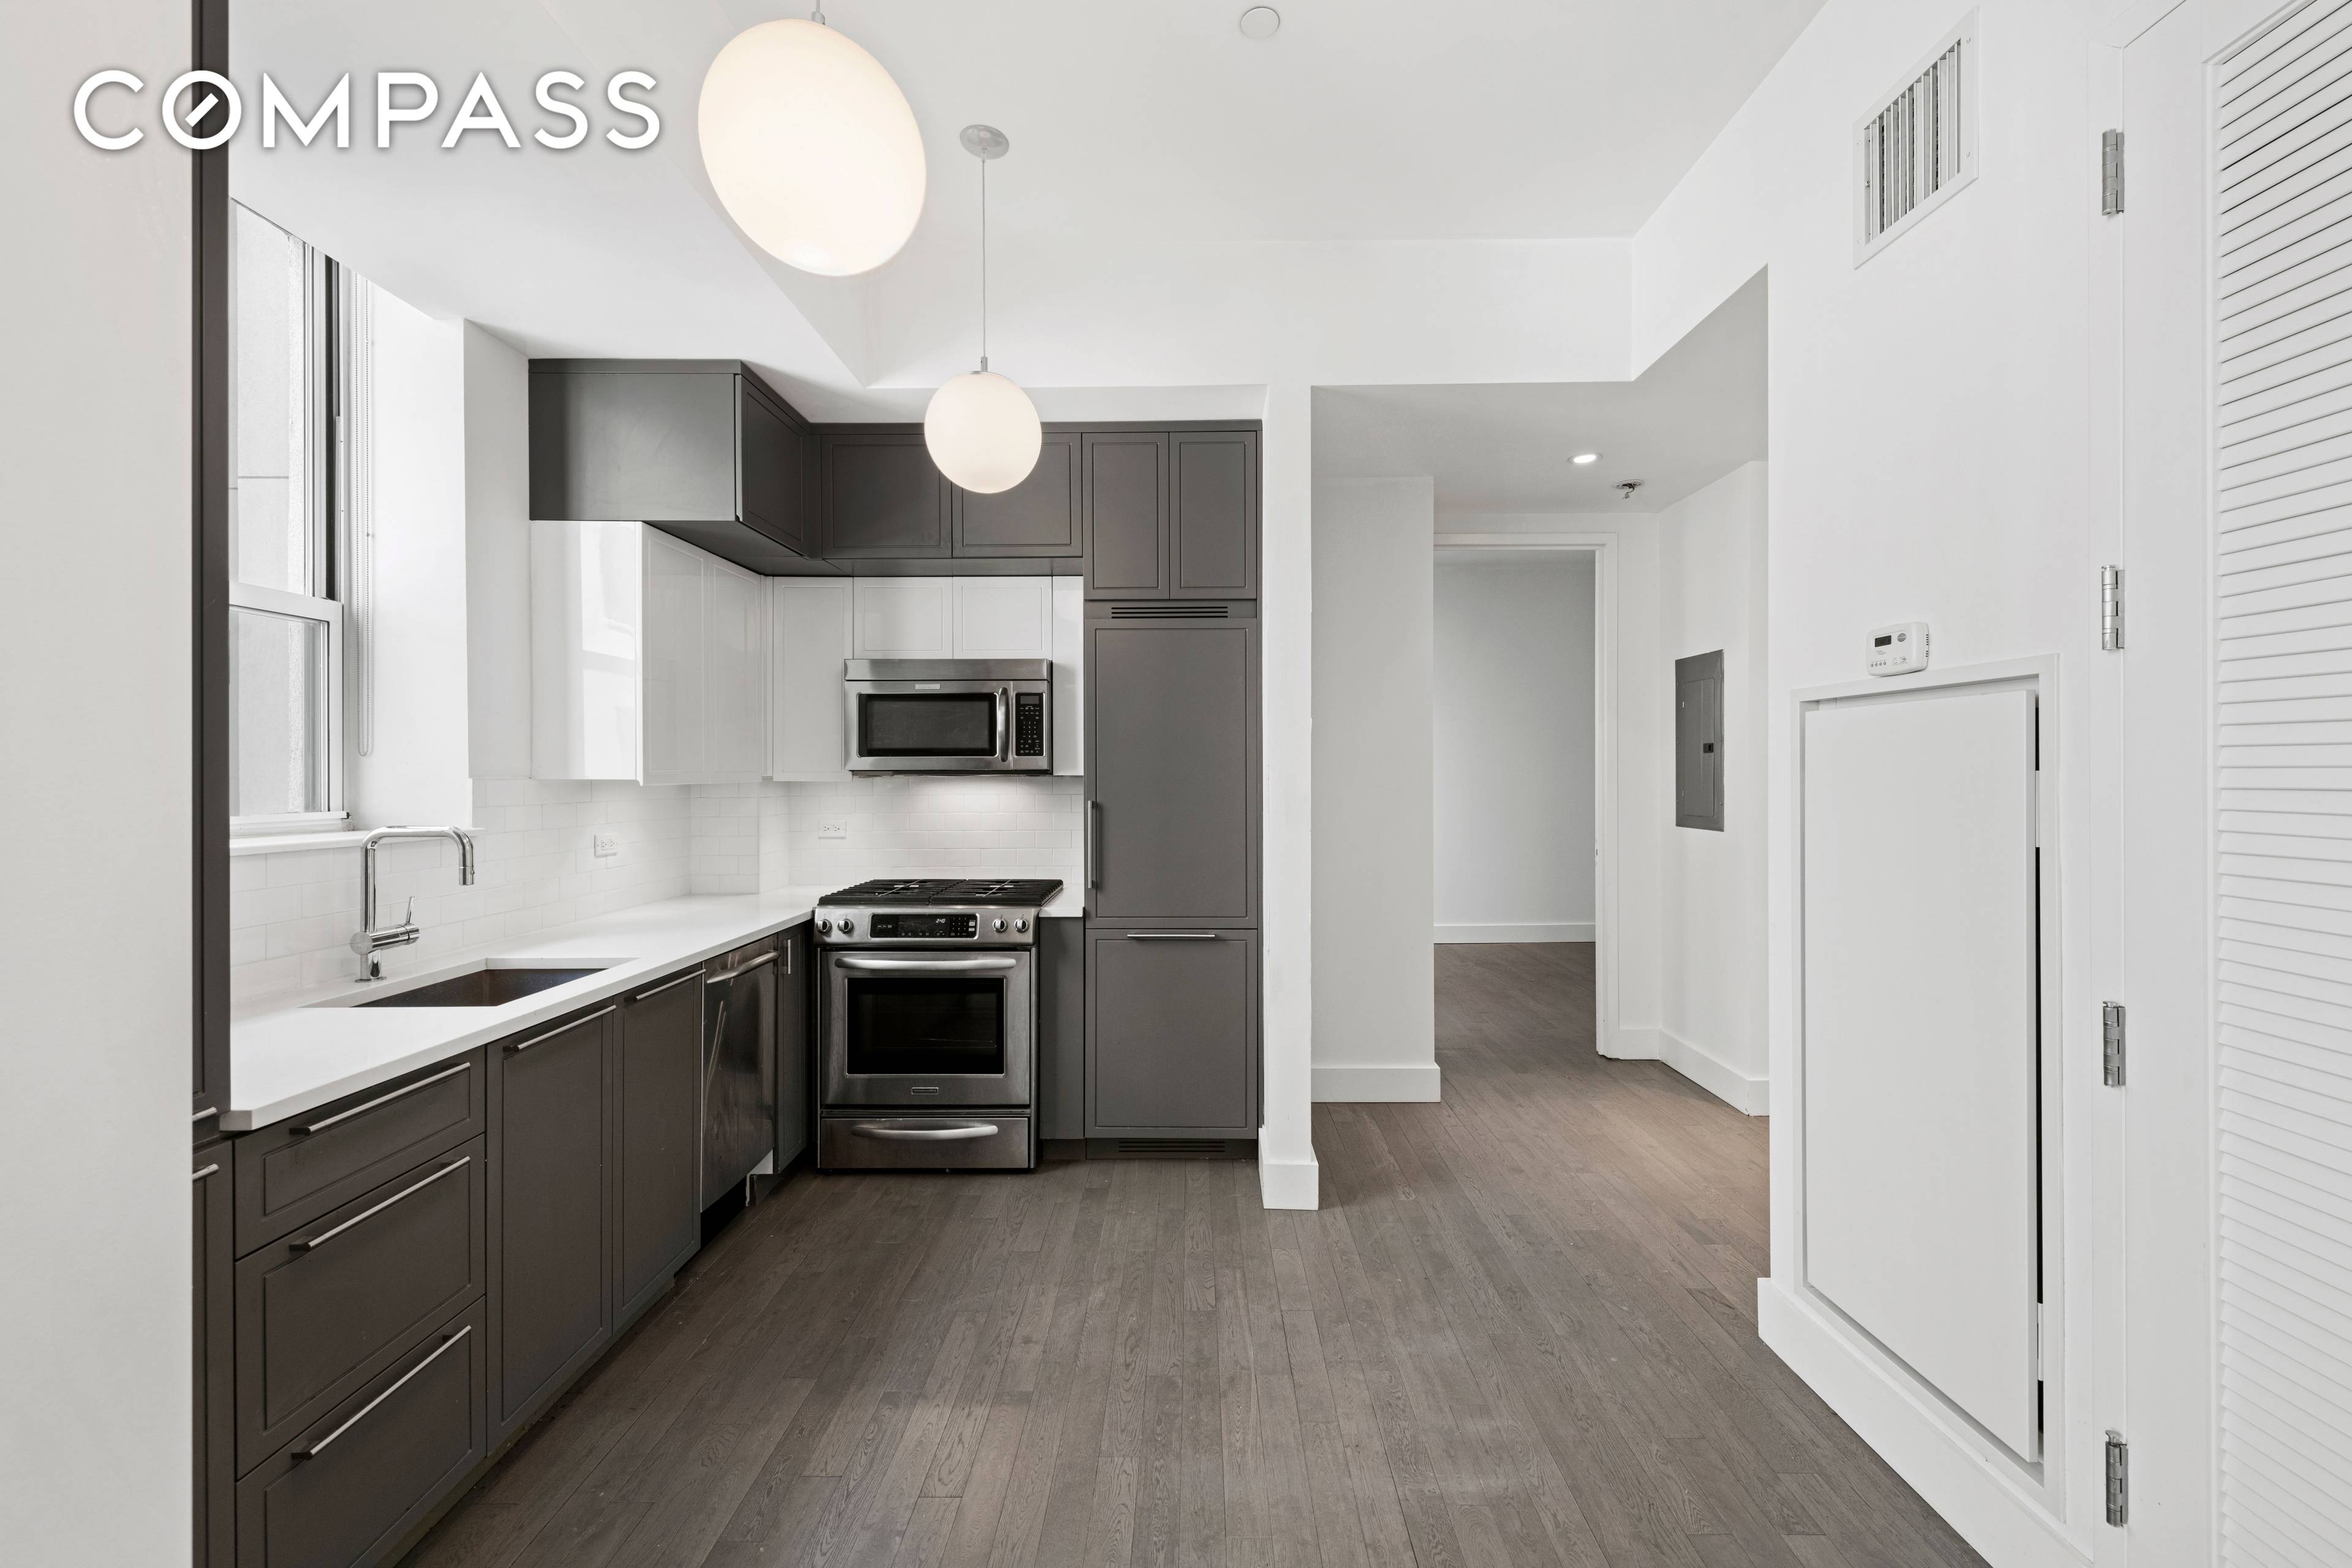 Modern and stylish one bedroom home situated in Nine52, a highly coveted luxury tower centrally located in Hell s Kitchen.